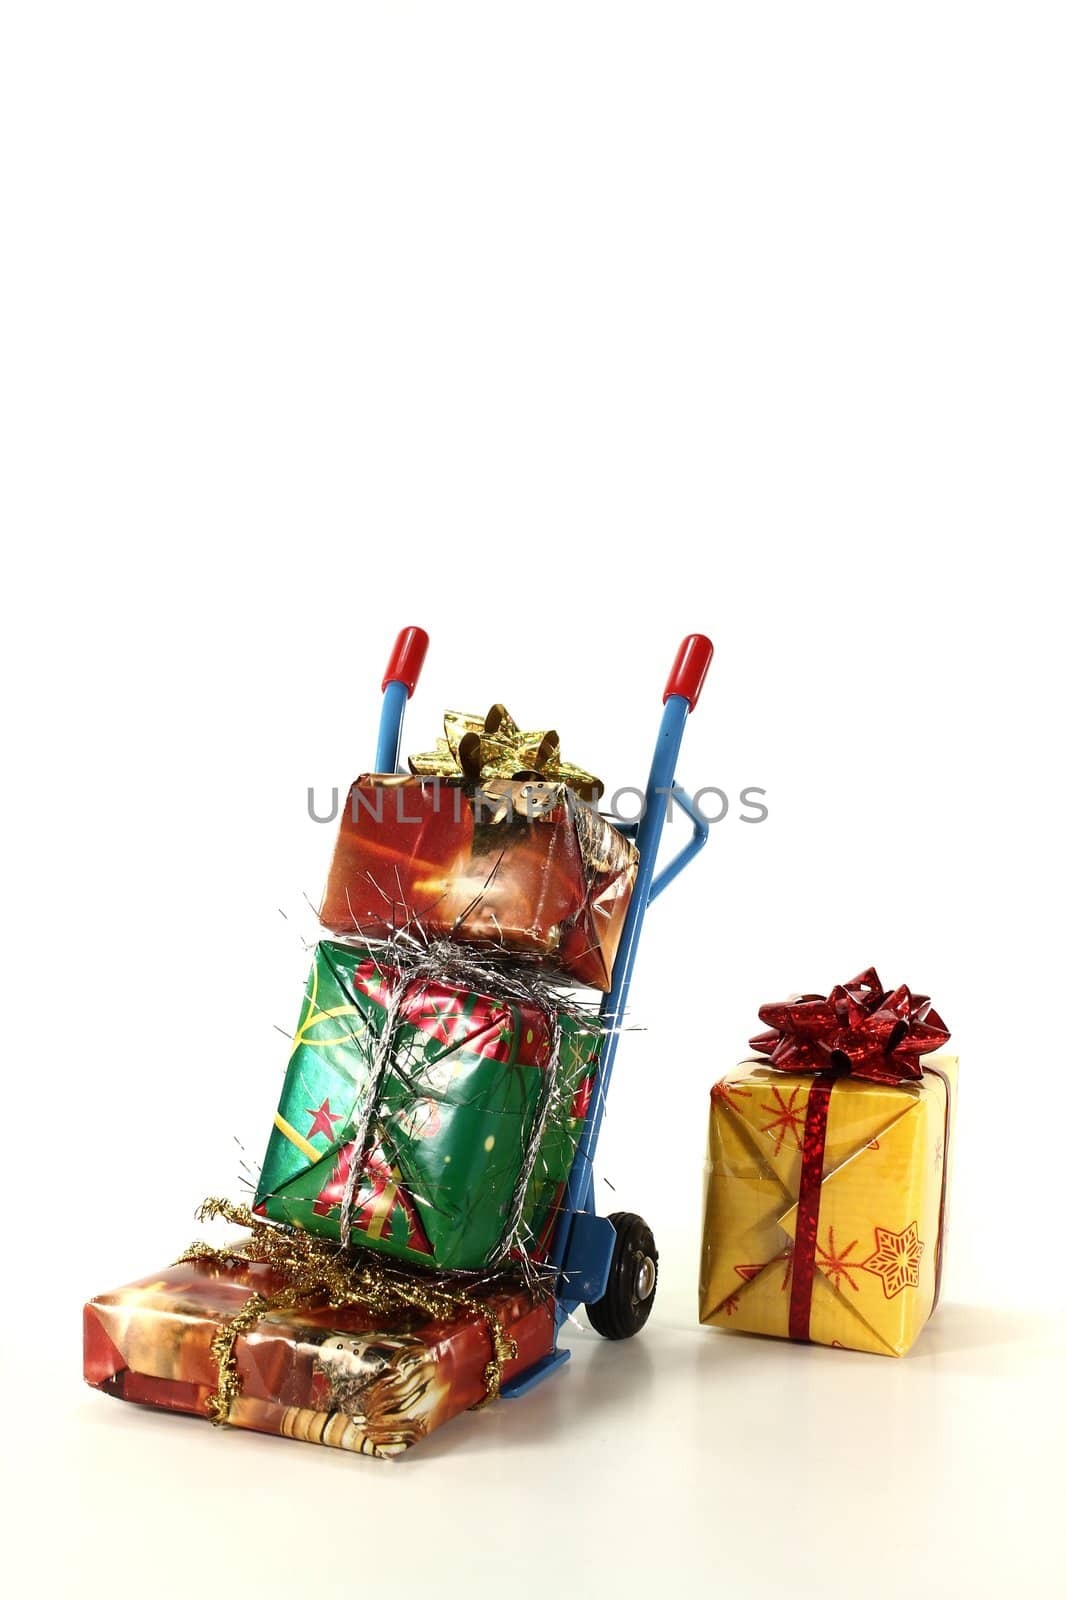 many colorful Christmas presents on a hand truck